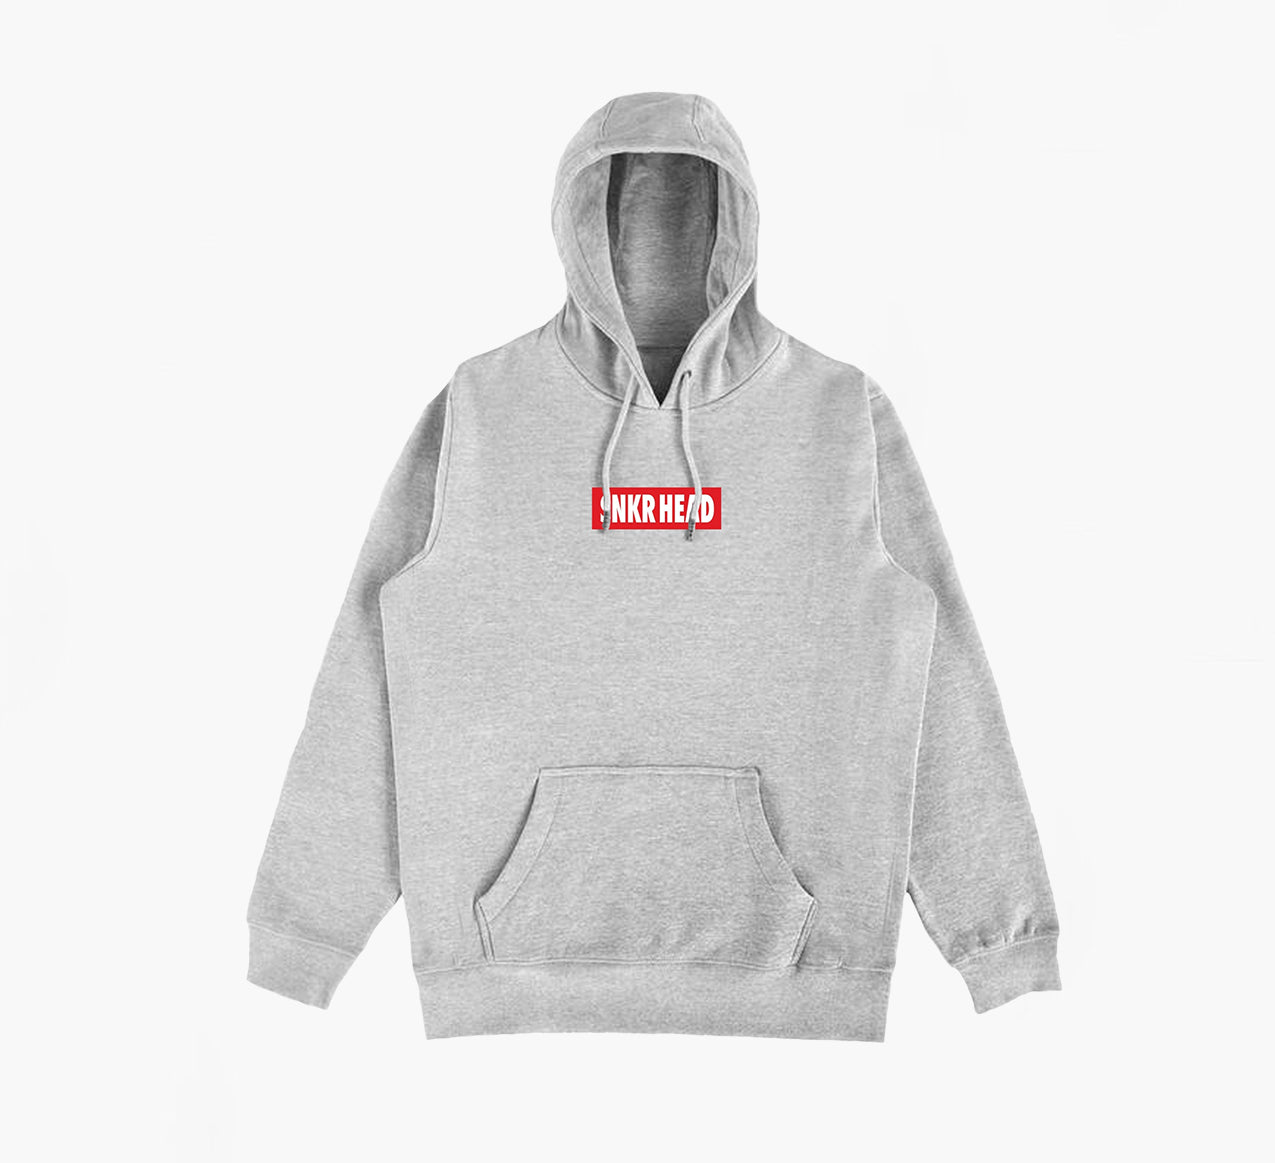 SNKR HEAD Embroidered Box Logo Grey Hoodie